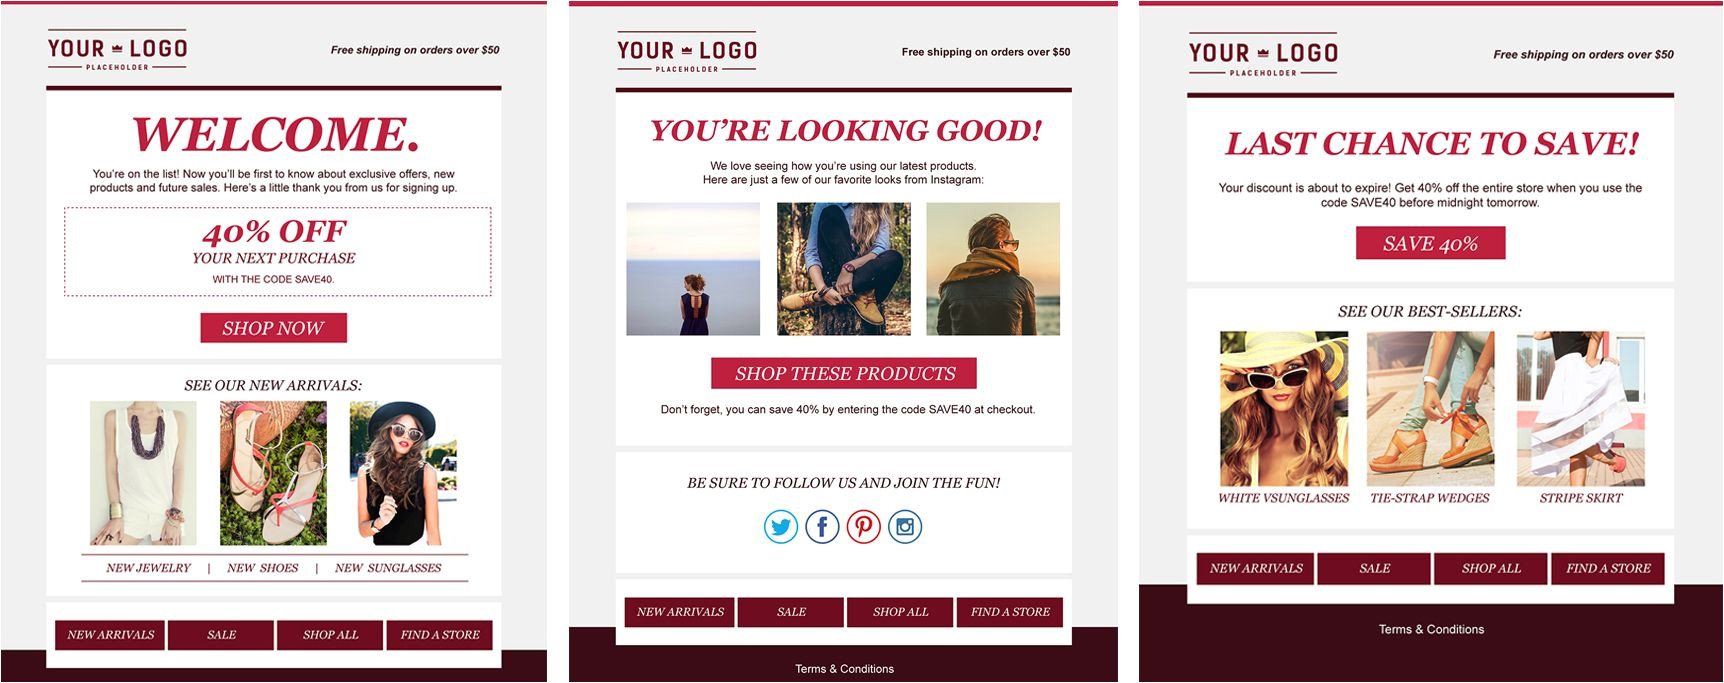 11 fabulous new email template designs for retailers